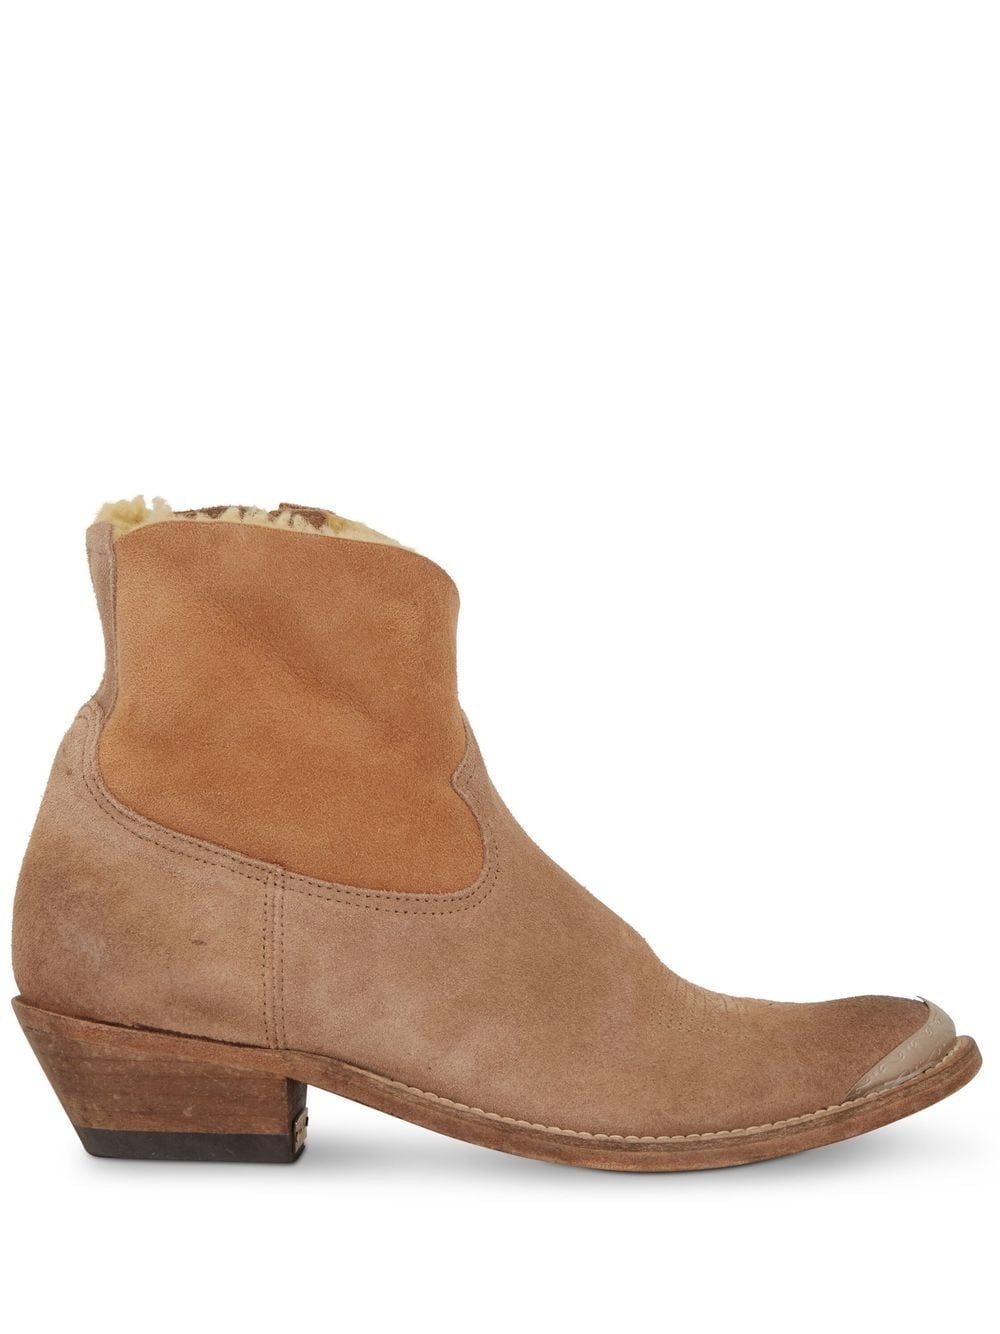 shearling-lined Western ankle boots - 1